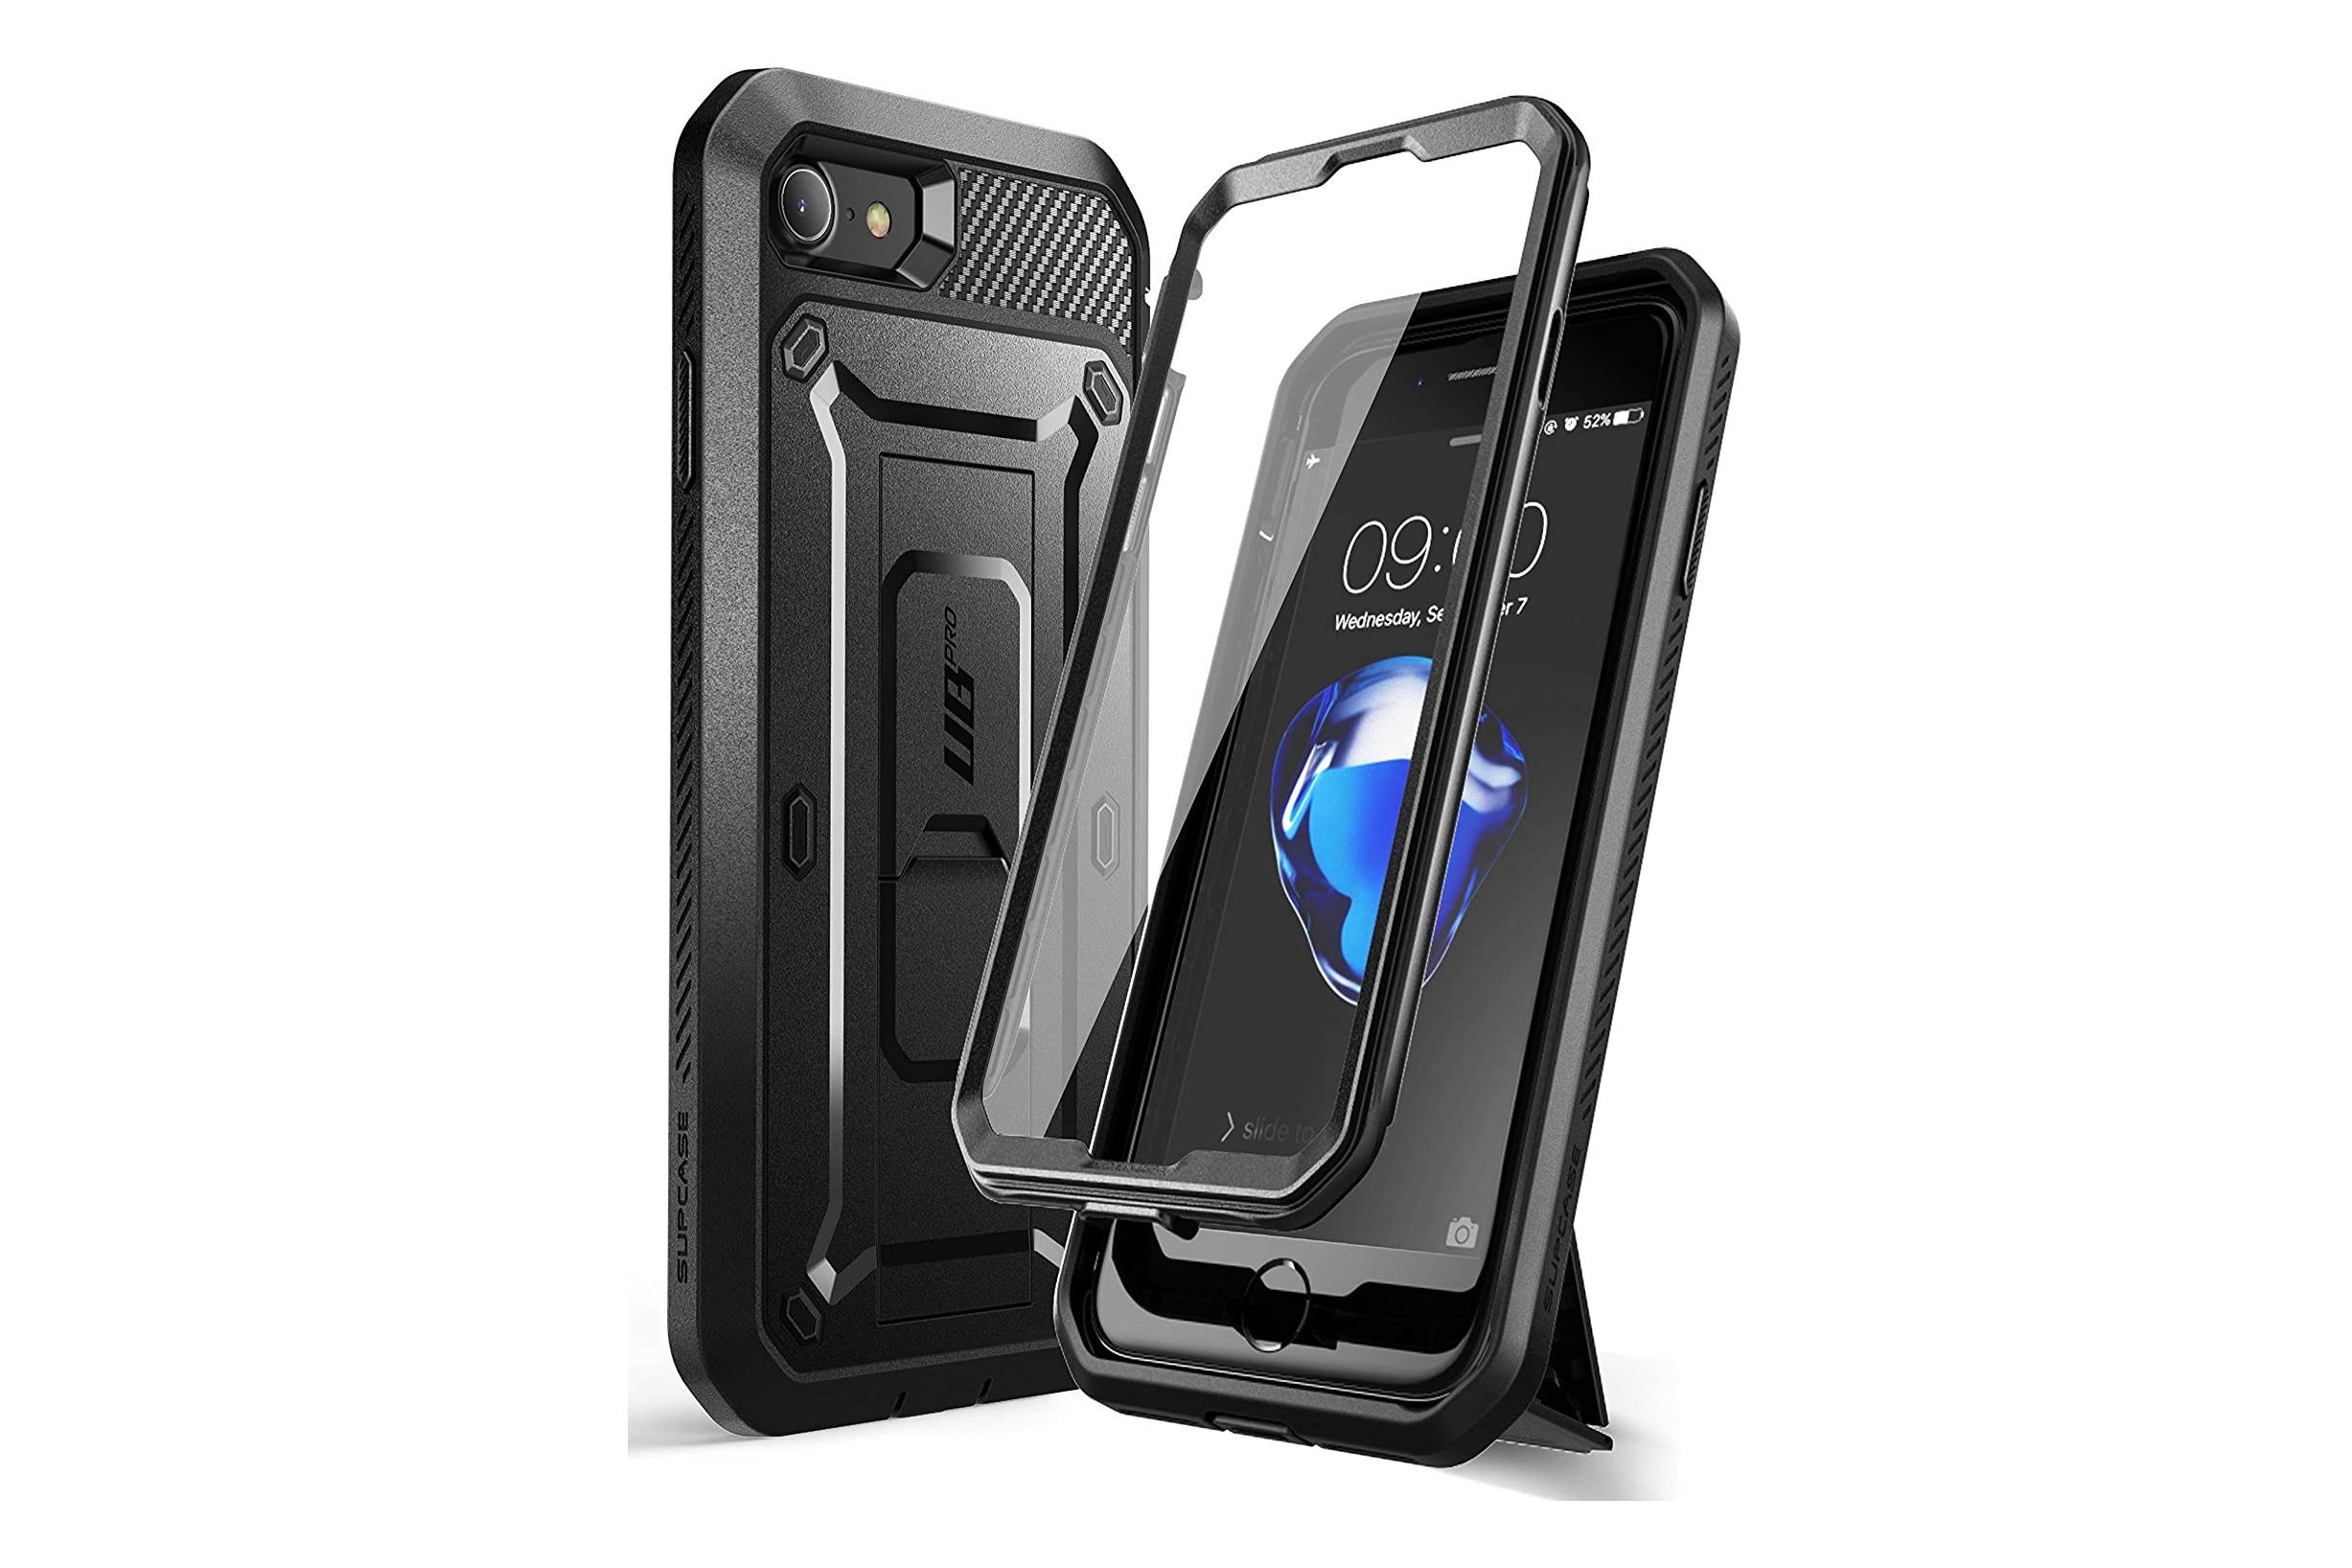 MOBOSI Compatible with iPhone SE 2022 Case/iPhone SE 2020/iPhone 8/7 Case Rugged Military Grade Hard Vanguard Armor Cover Heavy Duty Shockproof Protective Phone Case 4.7 Inch Matte Black 